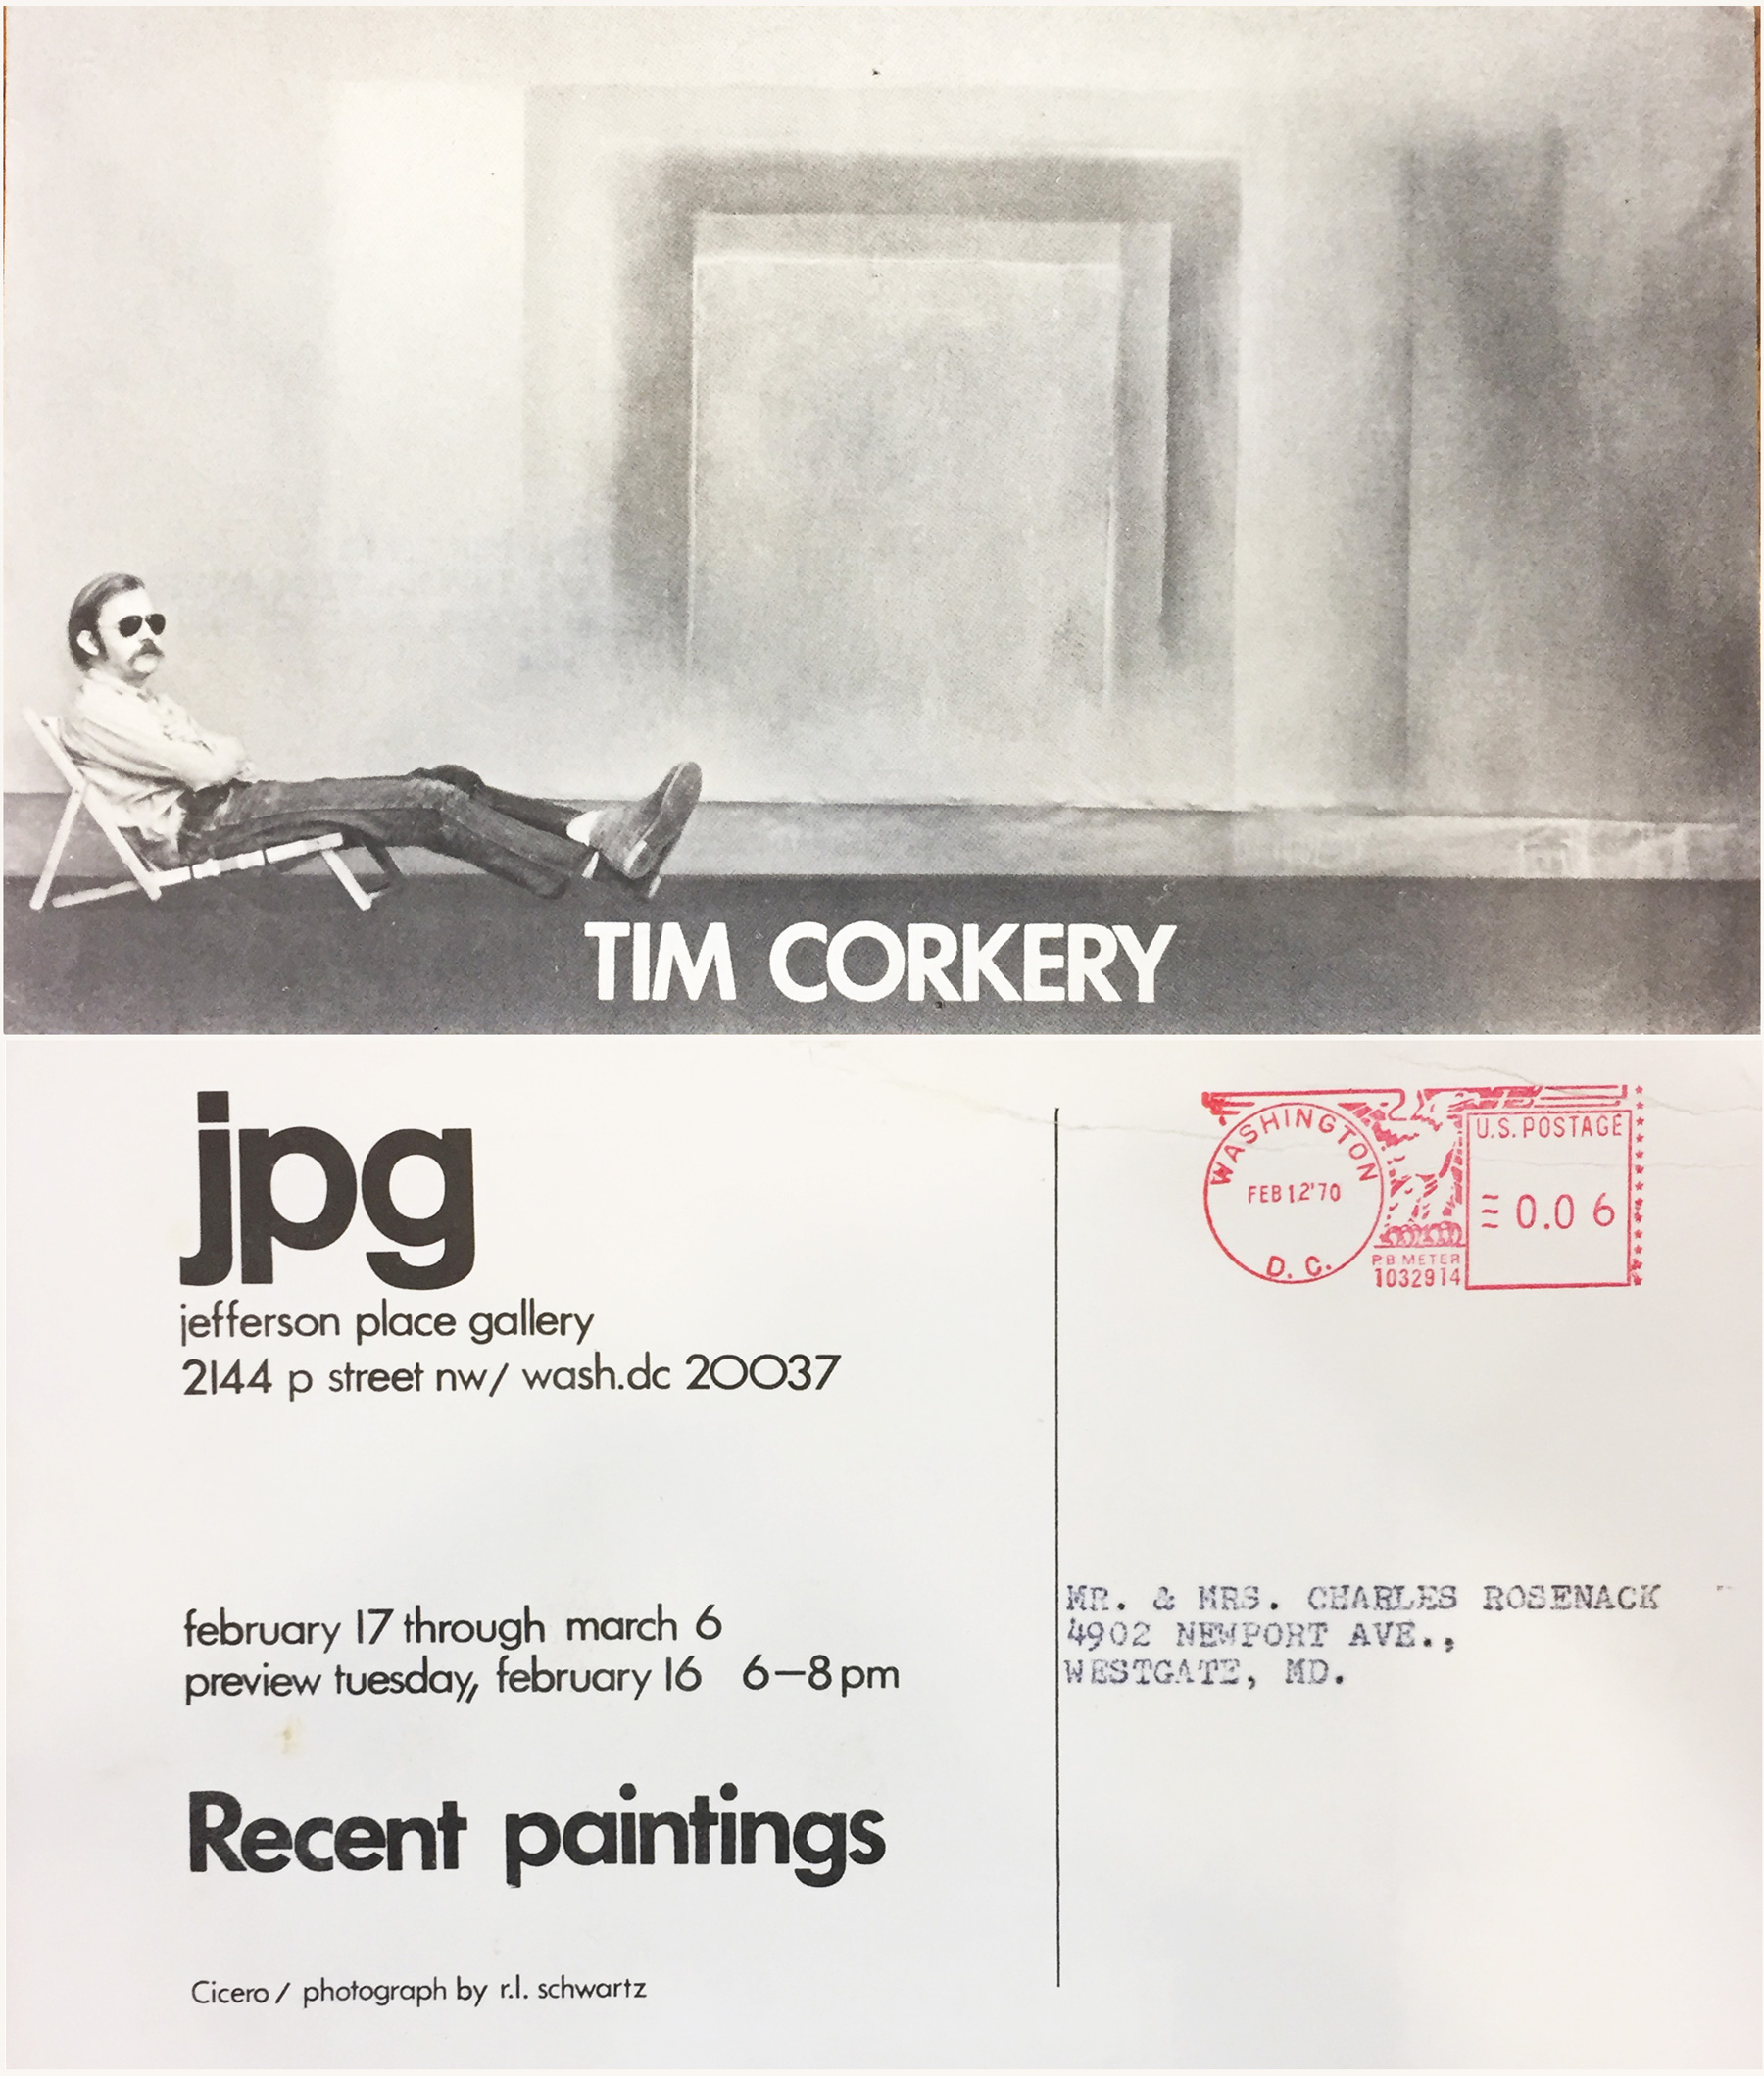 Announcement card front and back for Tim Corkery at Jefferson Place Gallery